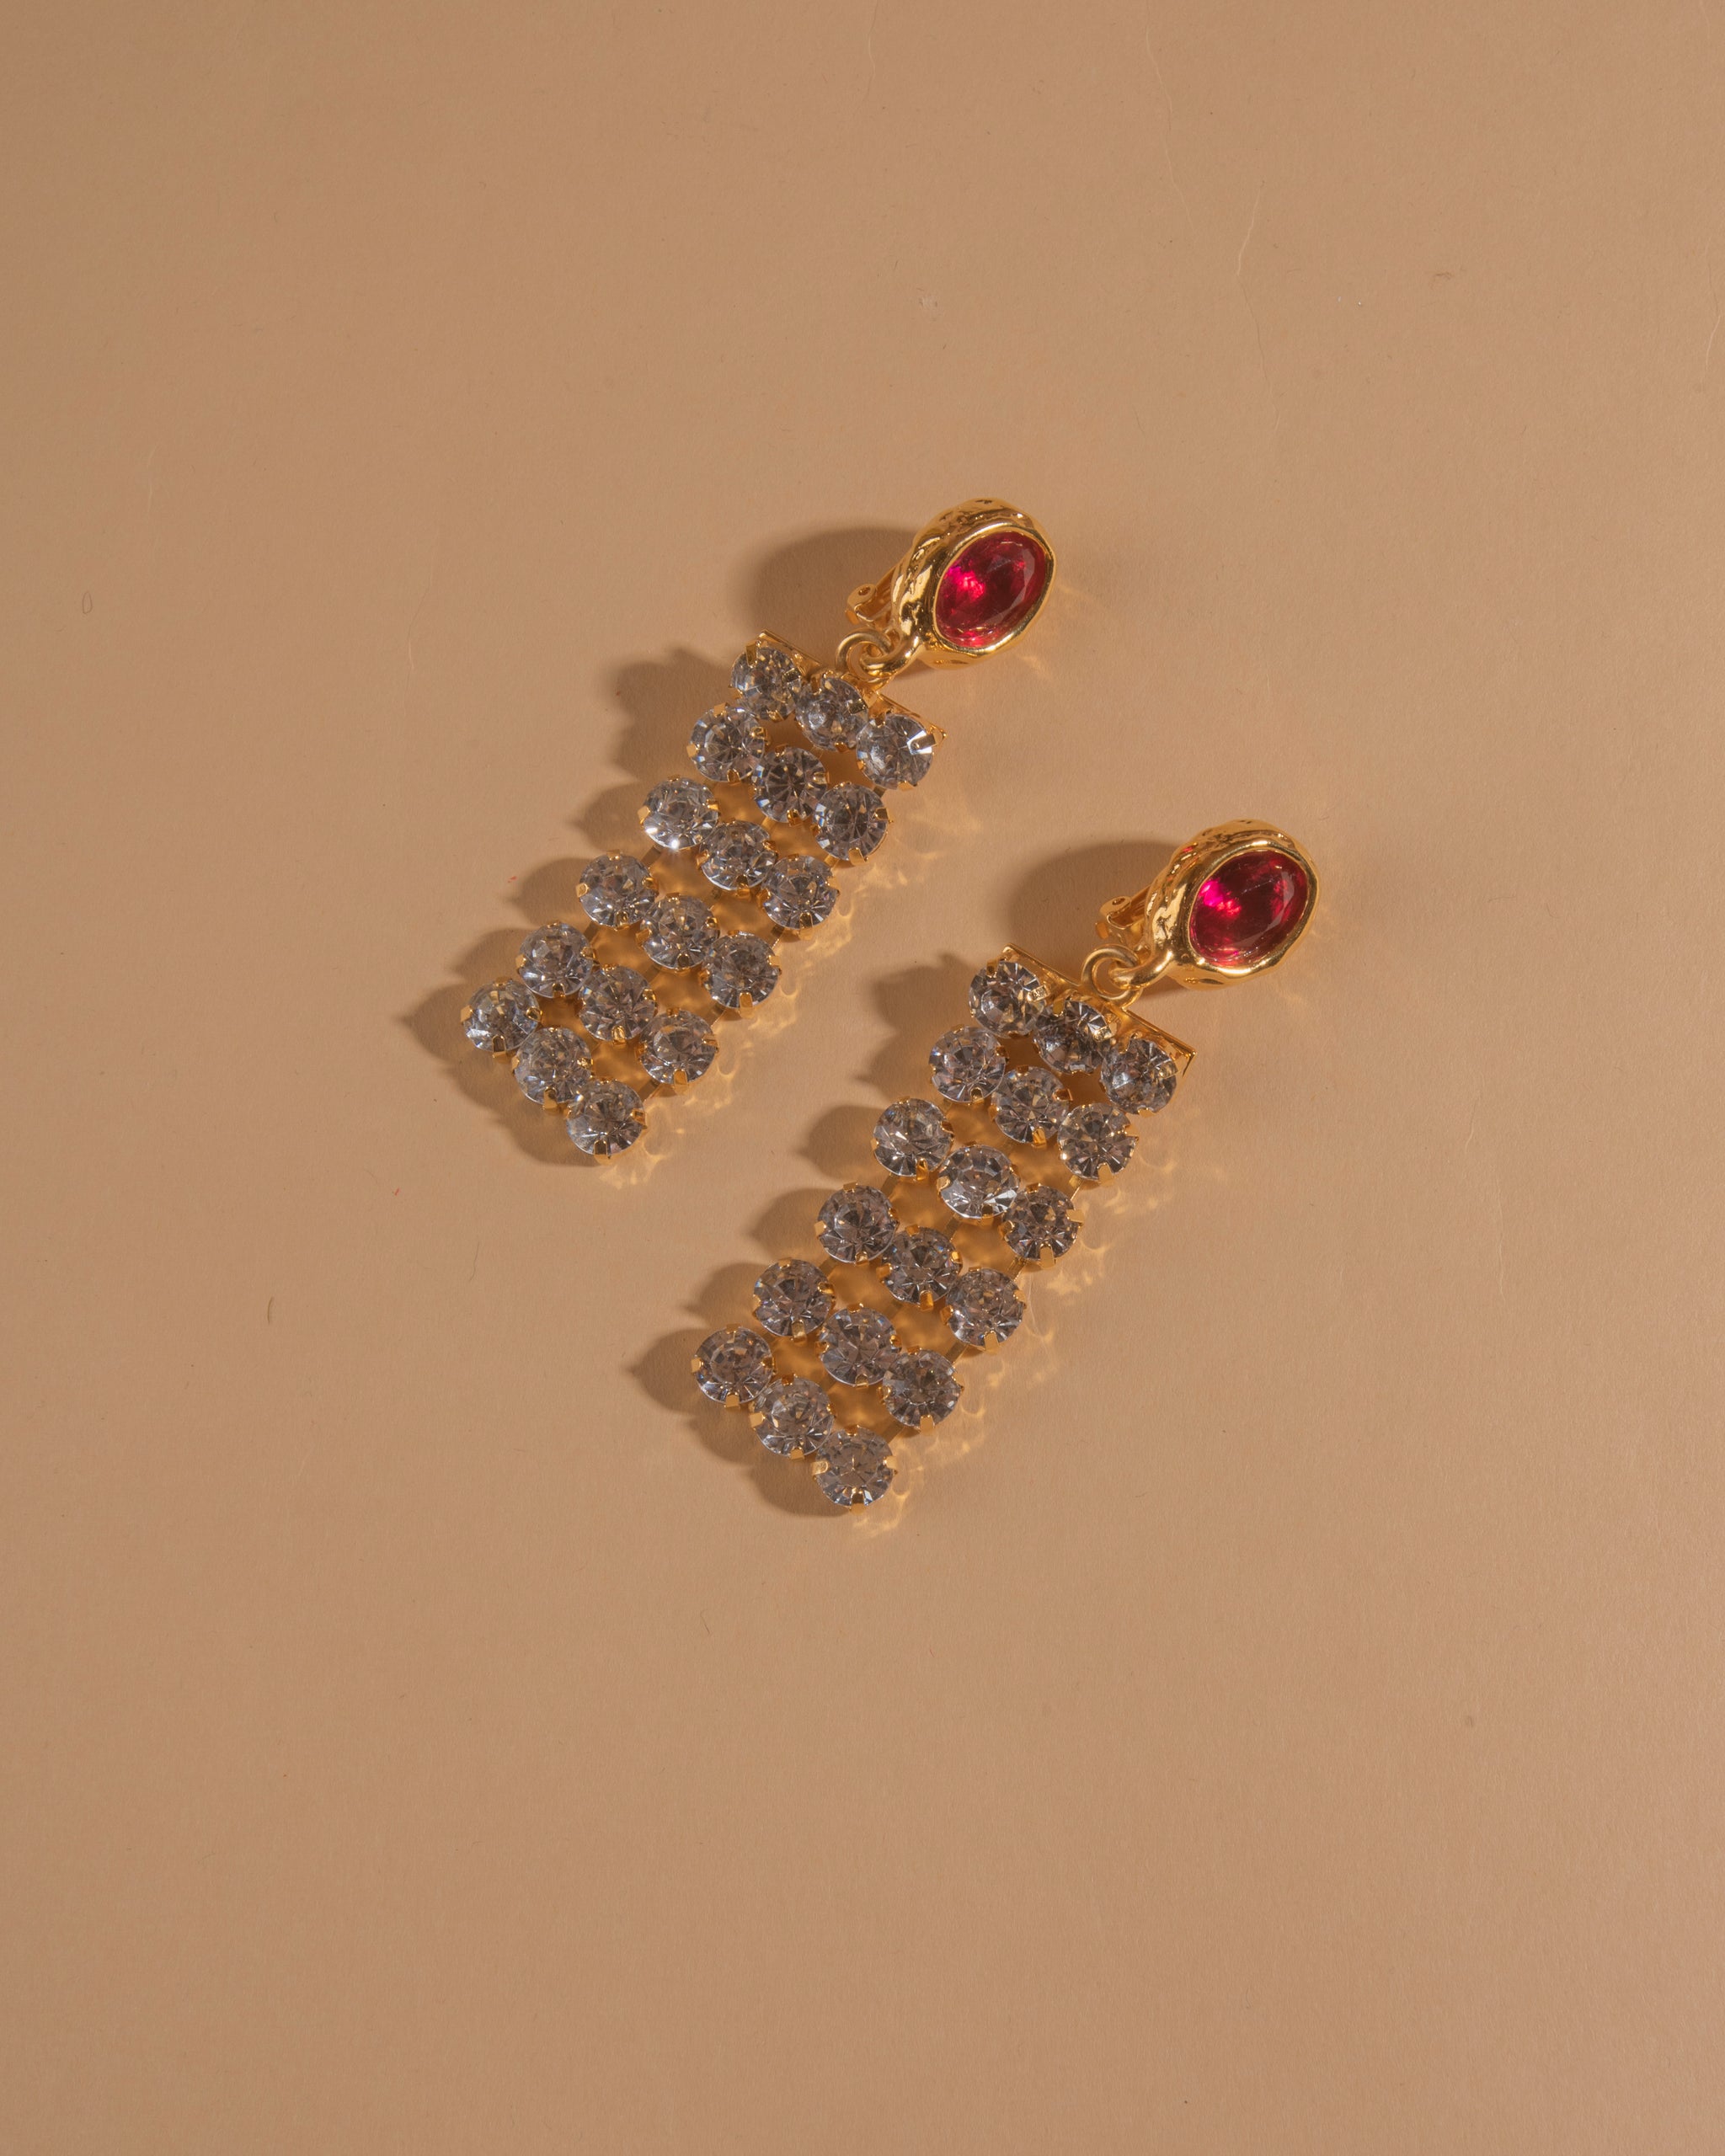 Pair of 18k gold plated clip-on earrings with glass crystal center stone and crystal chain.